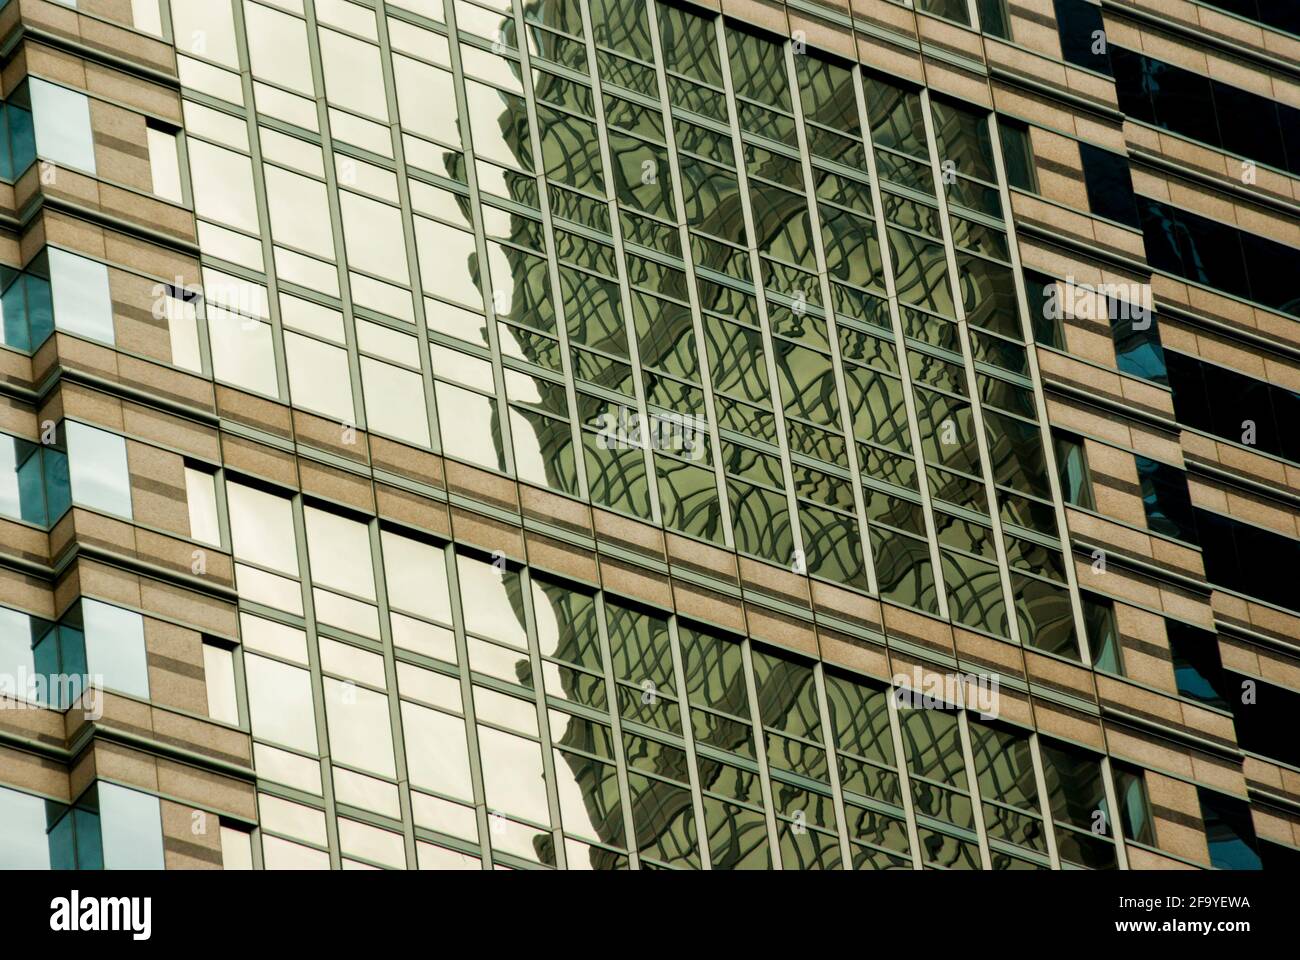 Reflections of one tall building in the mirrored windows of another- Philadelphia USA. Stock Photo